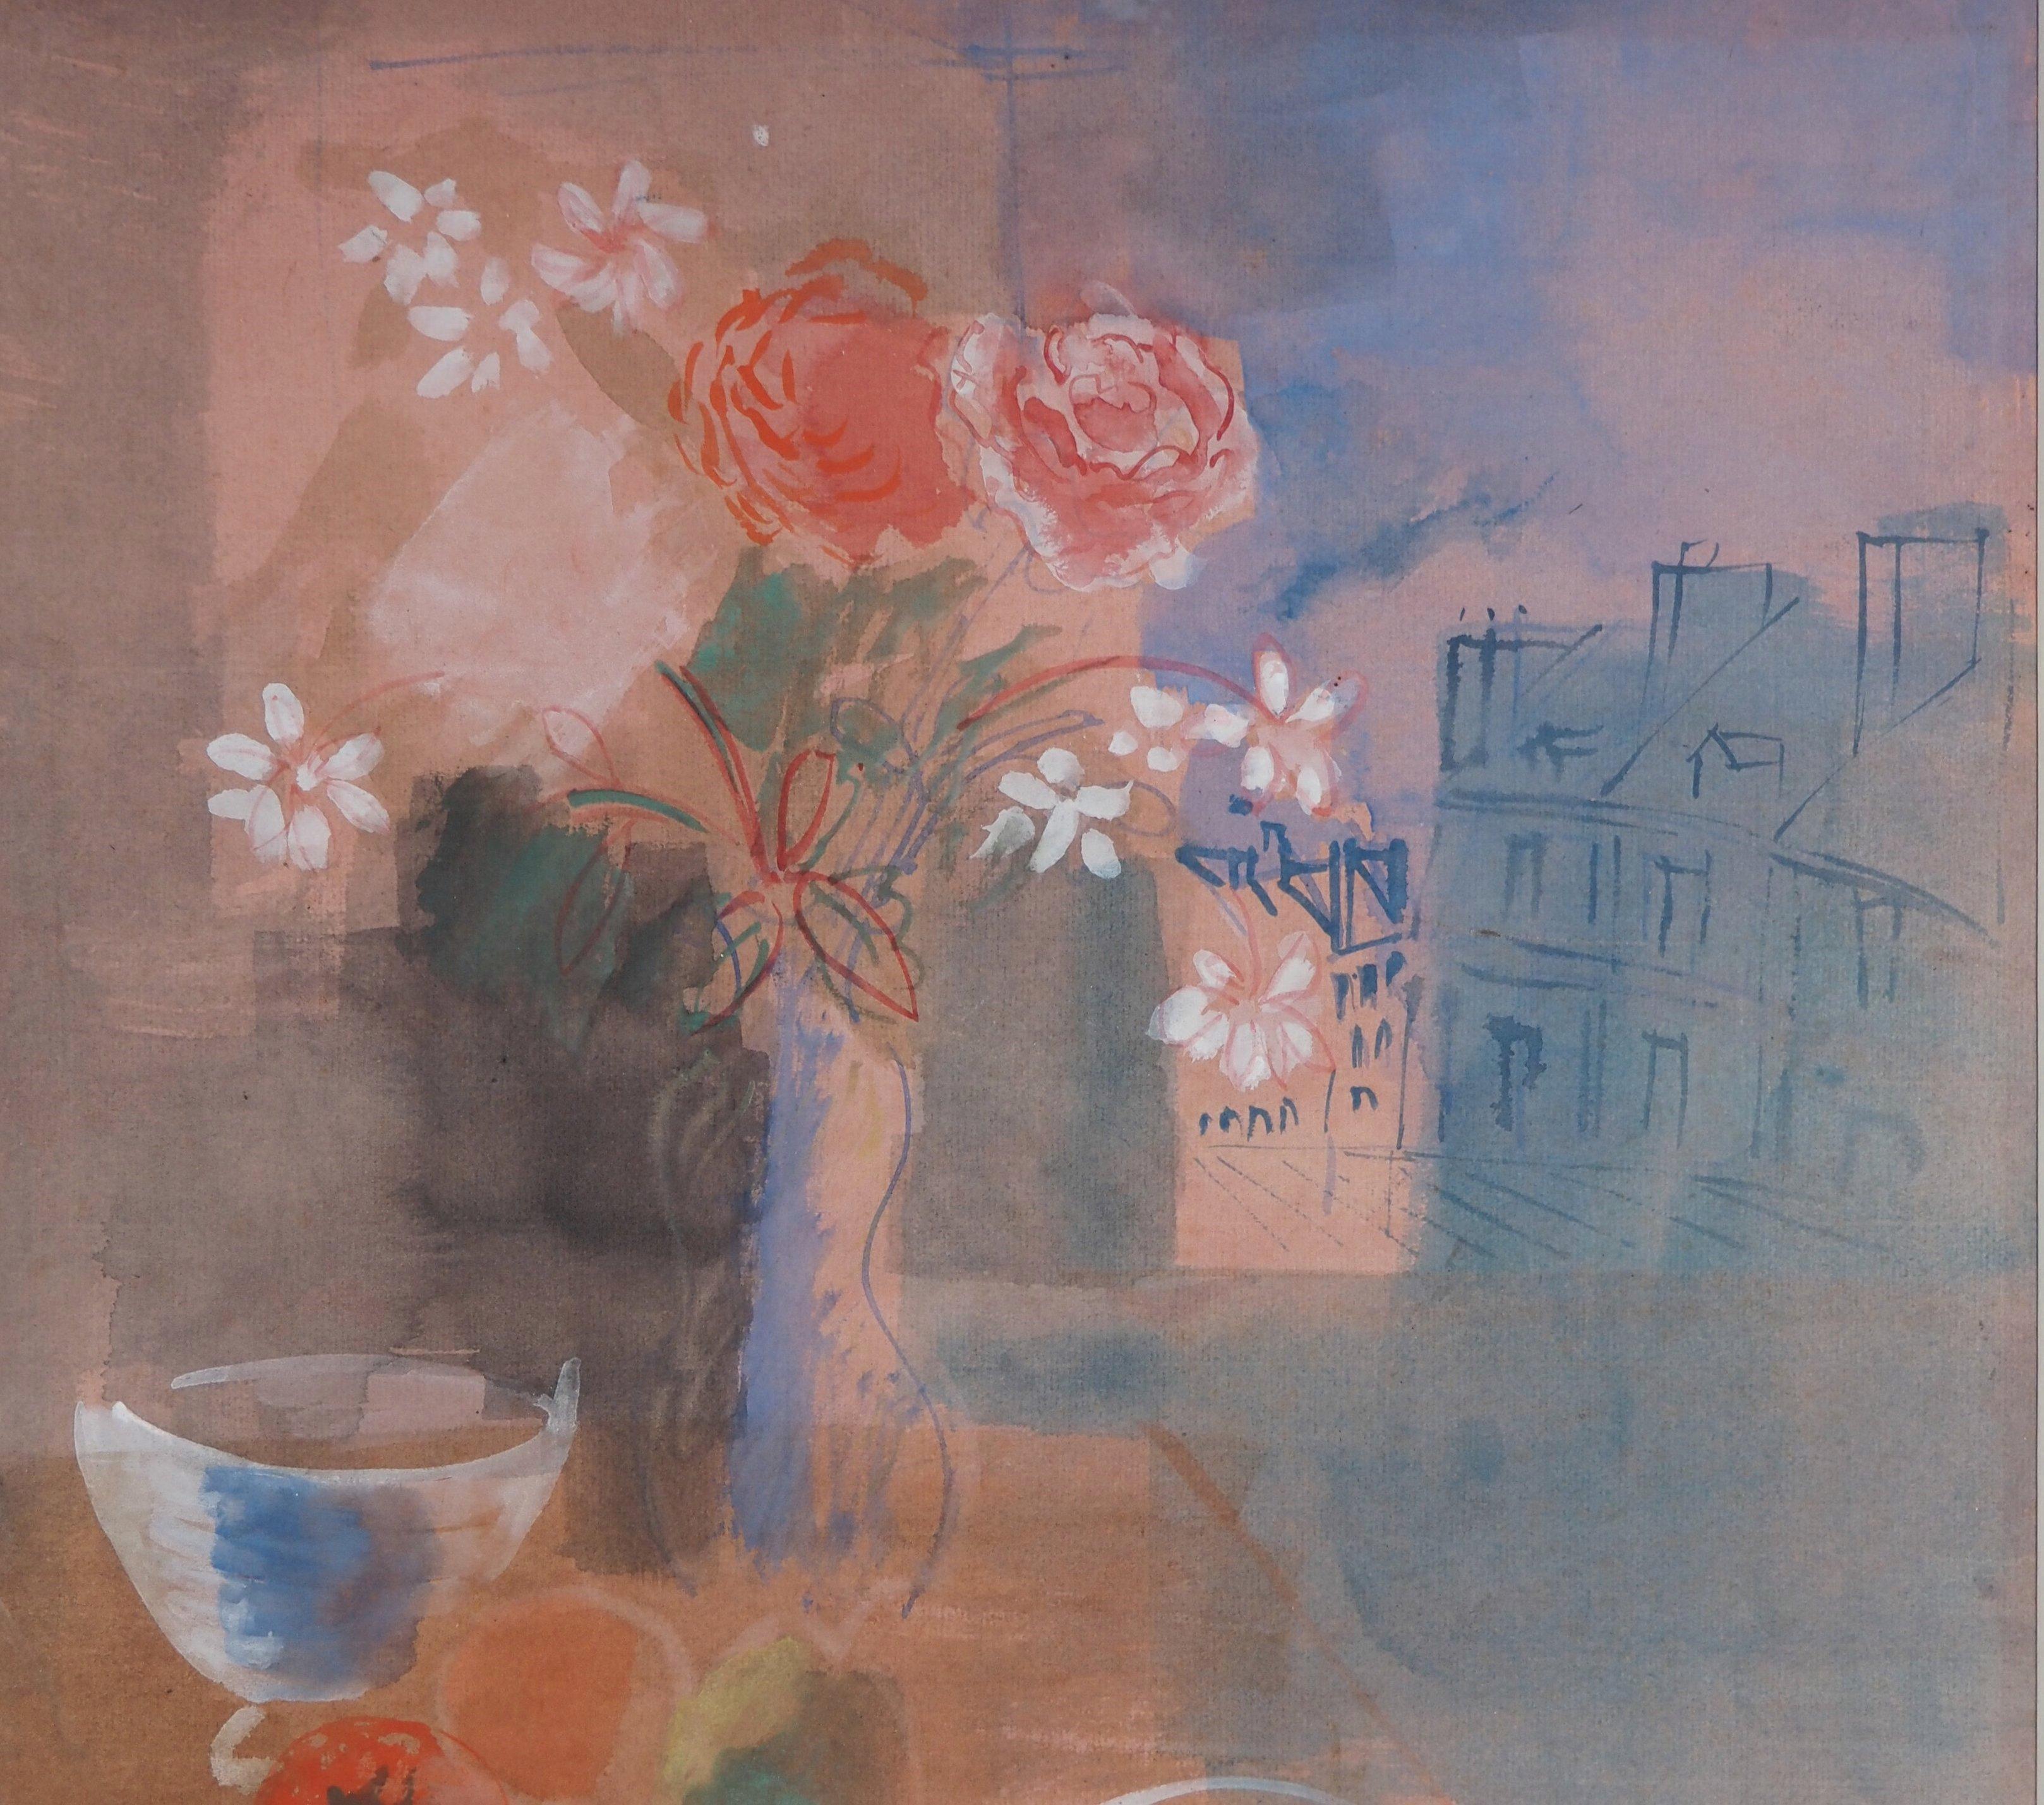 Jean Dufy
My Table with View on the Roofs of Paris

Watercolor and gouache on paper
Signed at the top right
On paper 53 x 40 cm at view (c. 21 x 16 in)
Presented in a golden wood frame 79 x 66 cm (c. 32 x 26 in)

PROVENANCE :
- Auction sale Ader